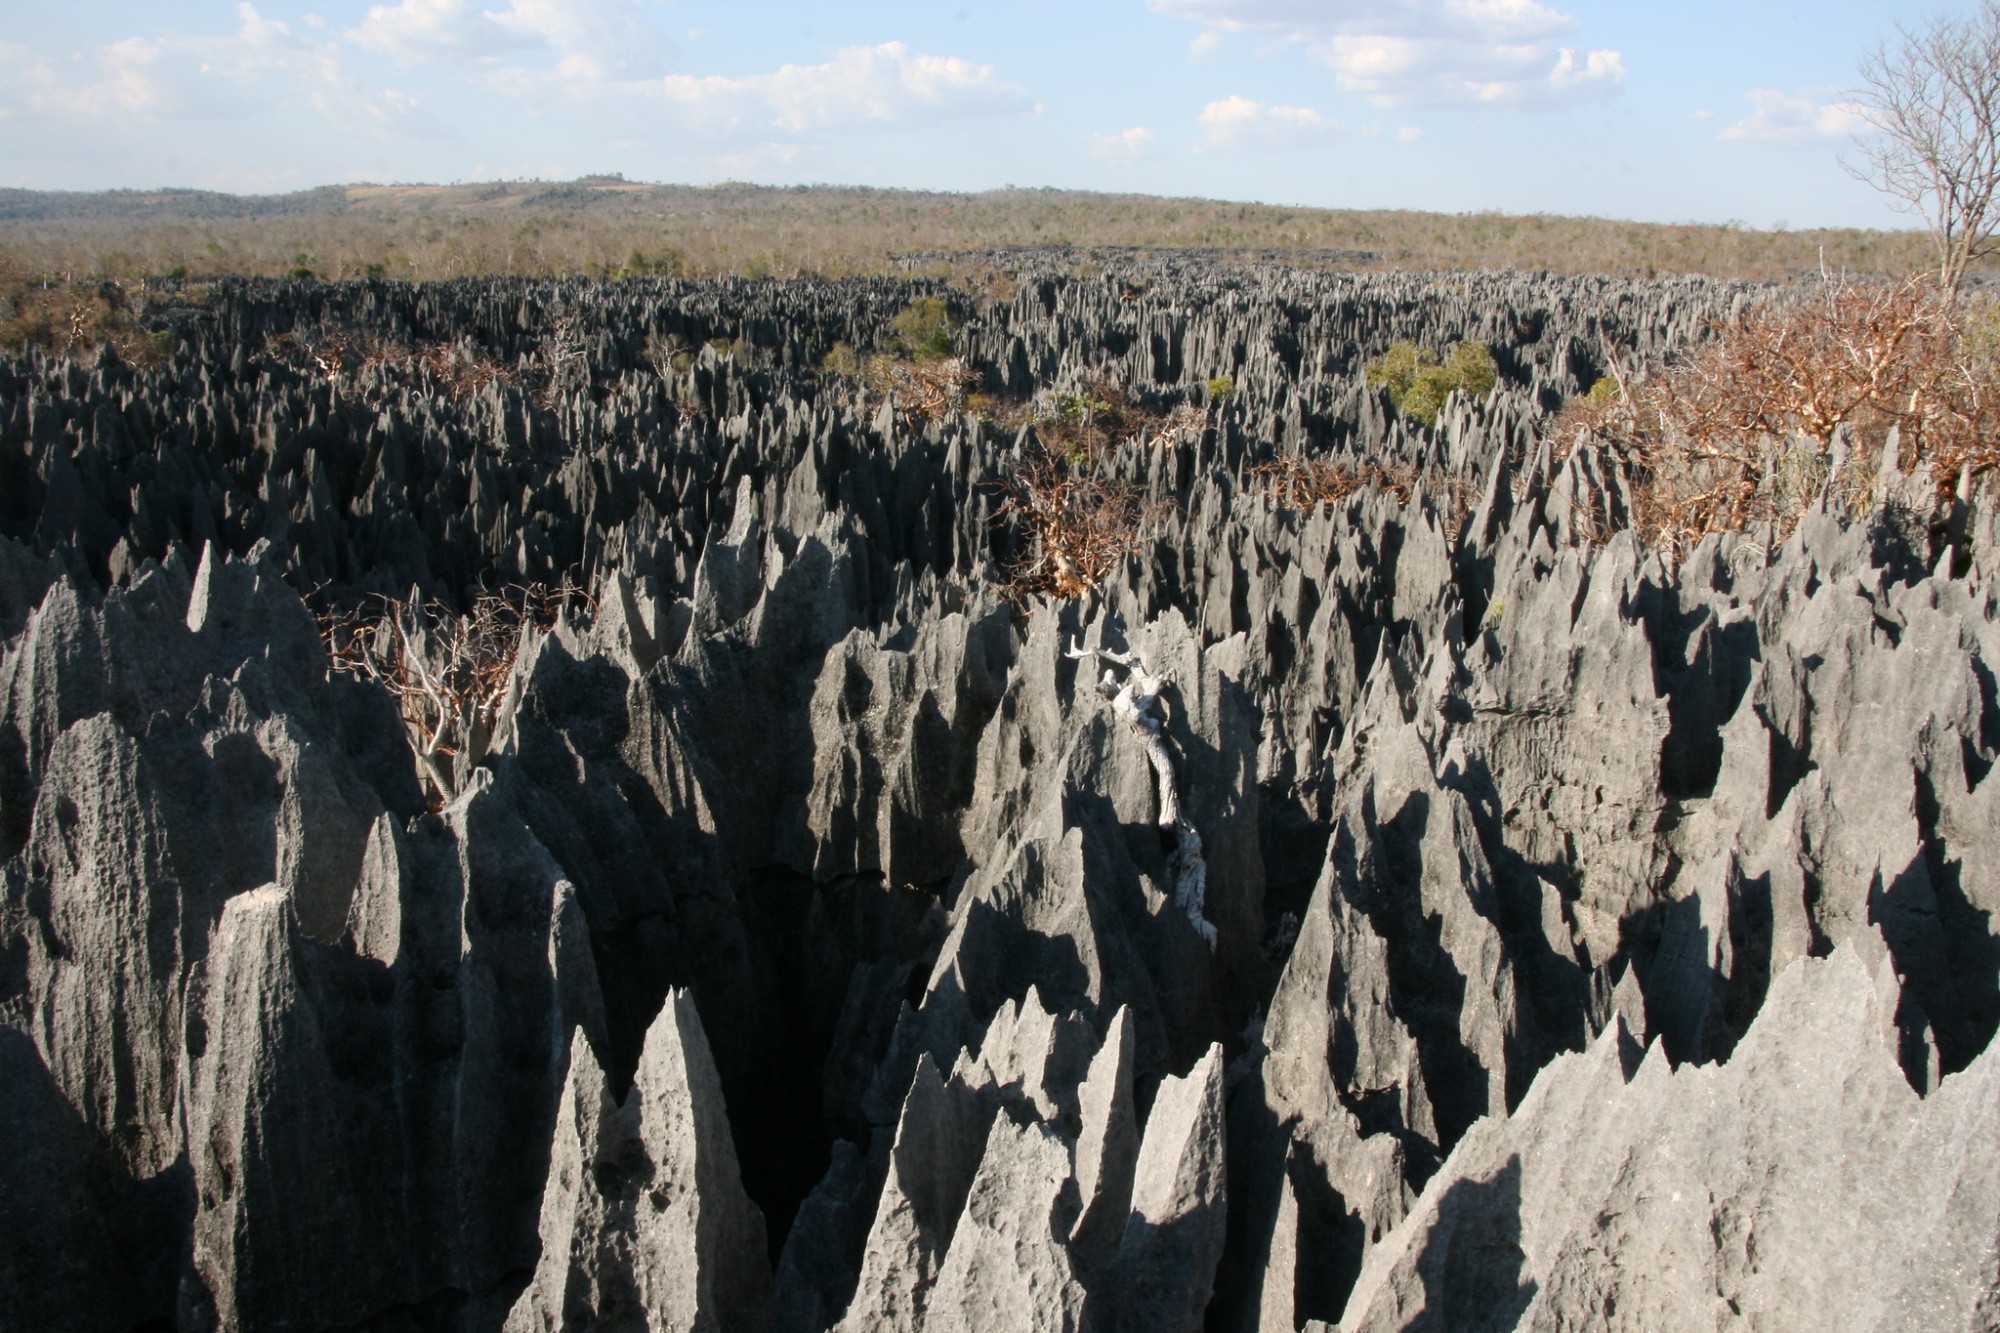 Rising to dizzying heights of 2,600 feet, the limestone pinnacles create a landscape like no other. Yet, amidst the daunting spires, a thriving ecosystem flourishes, harboring a variety of species